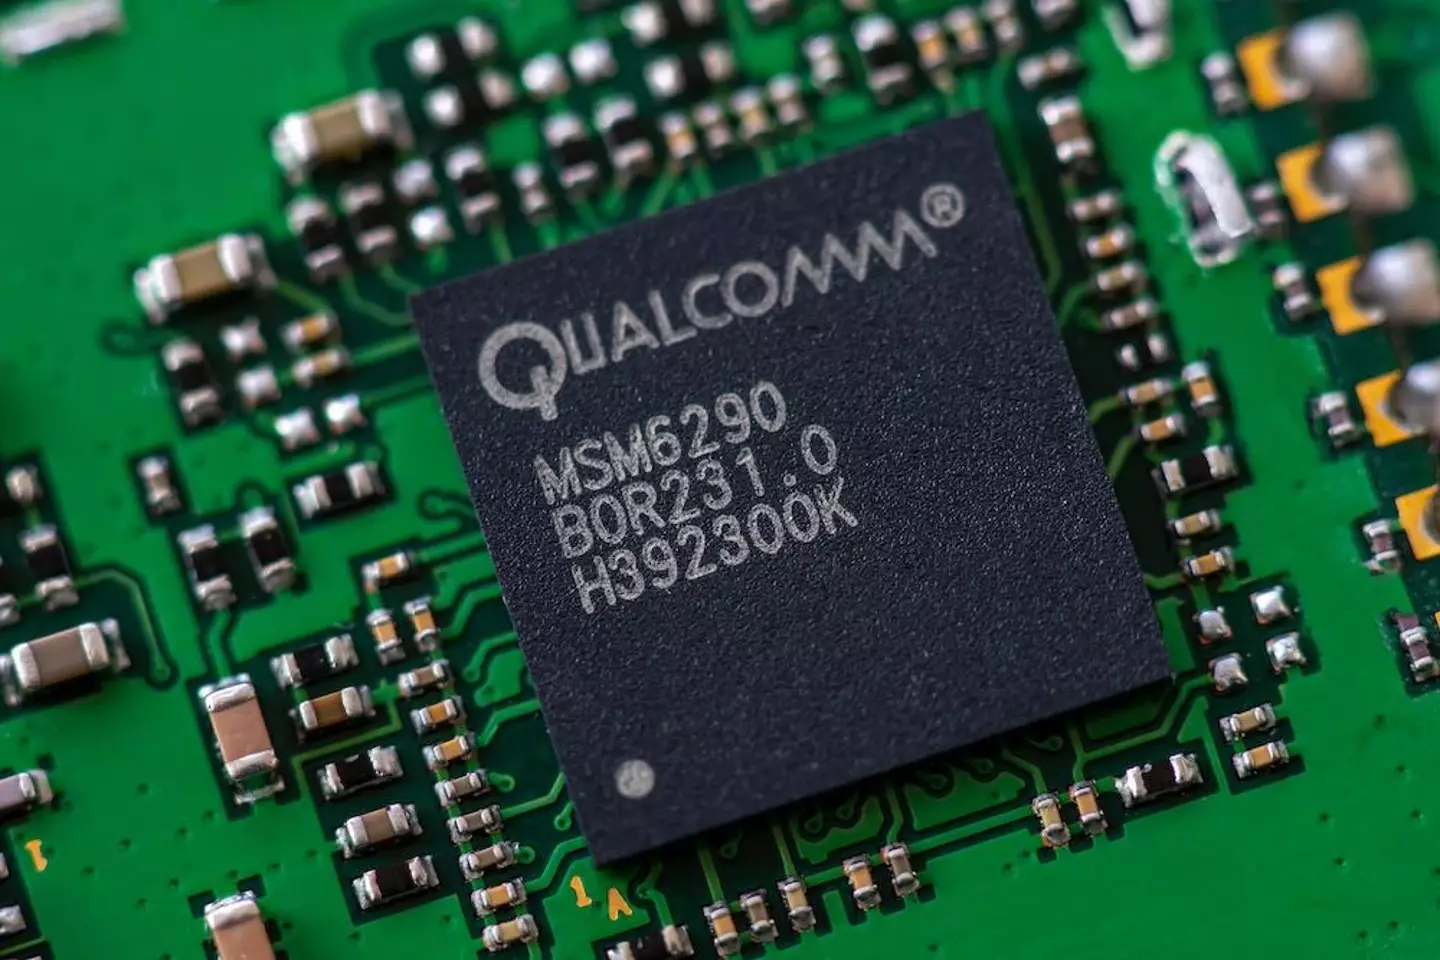 Smartphone chip manufacturer Qualcomm has been accused of inflating its fees.